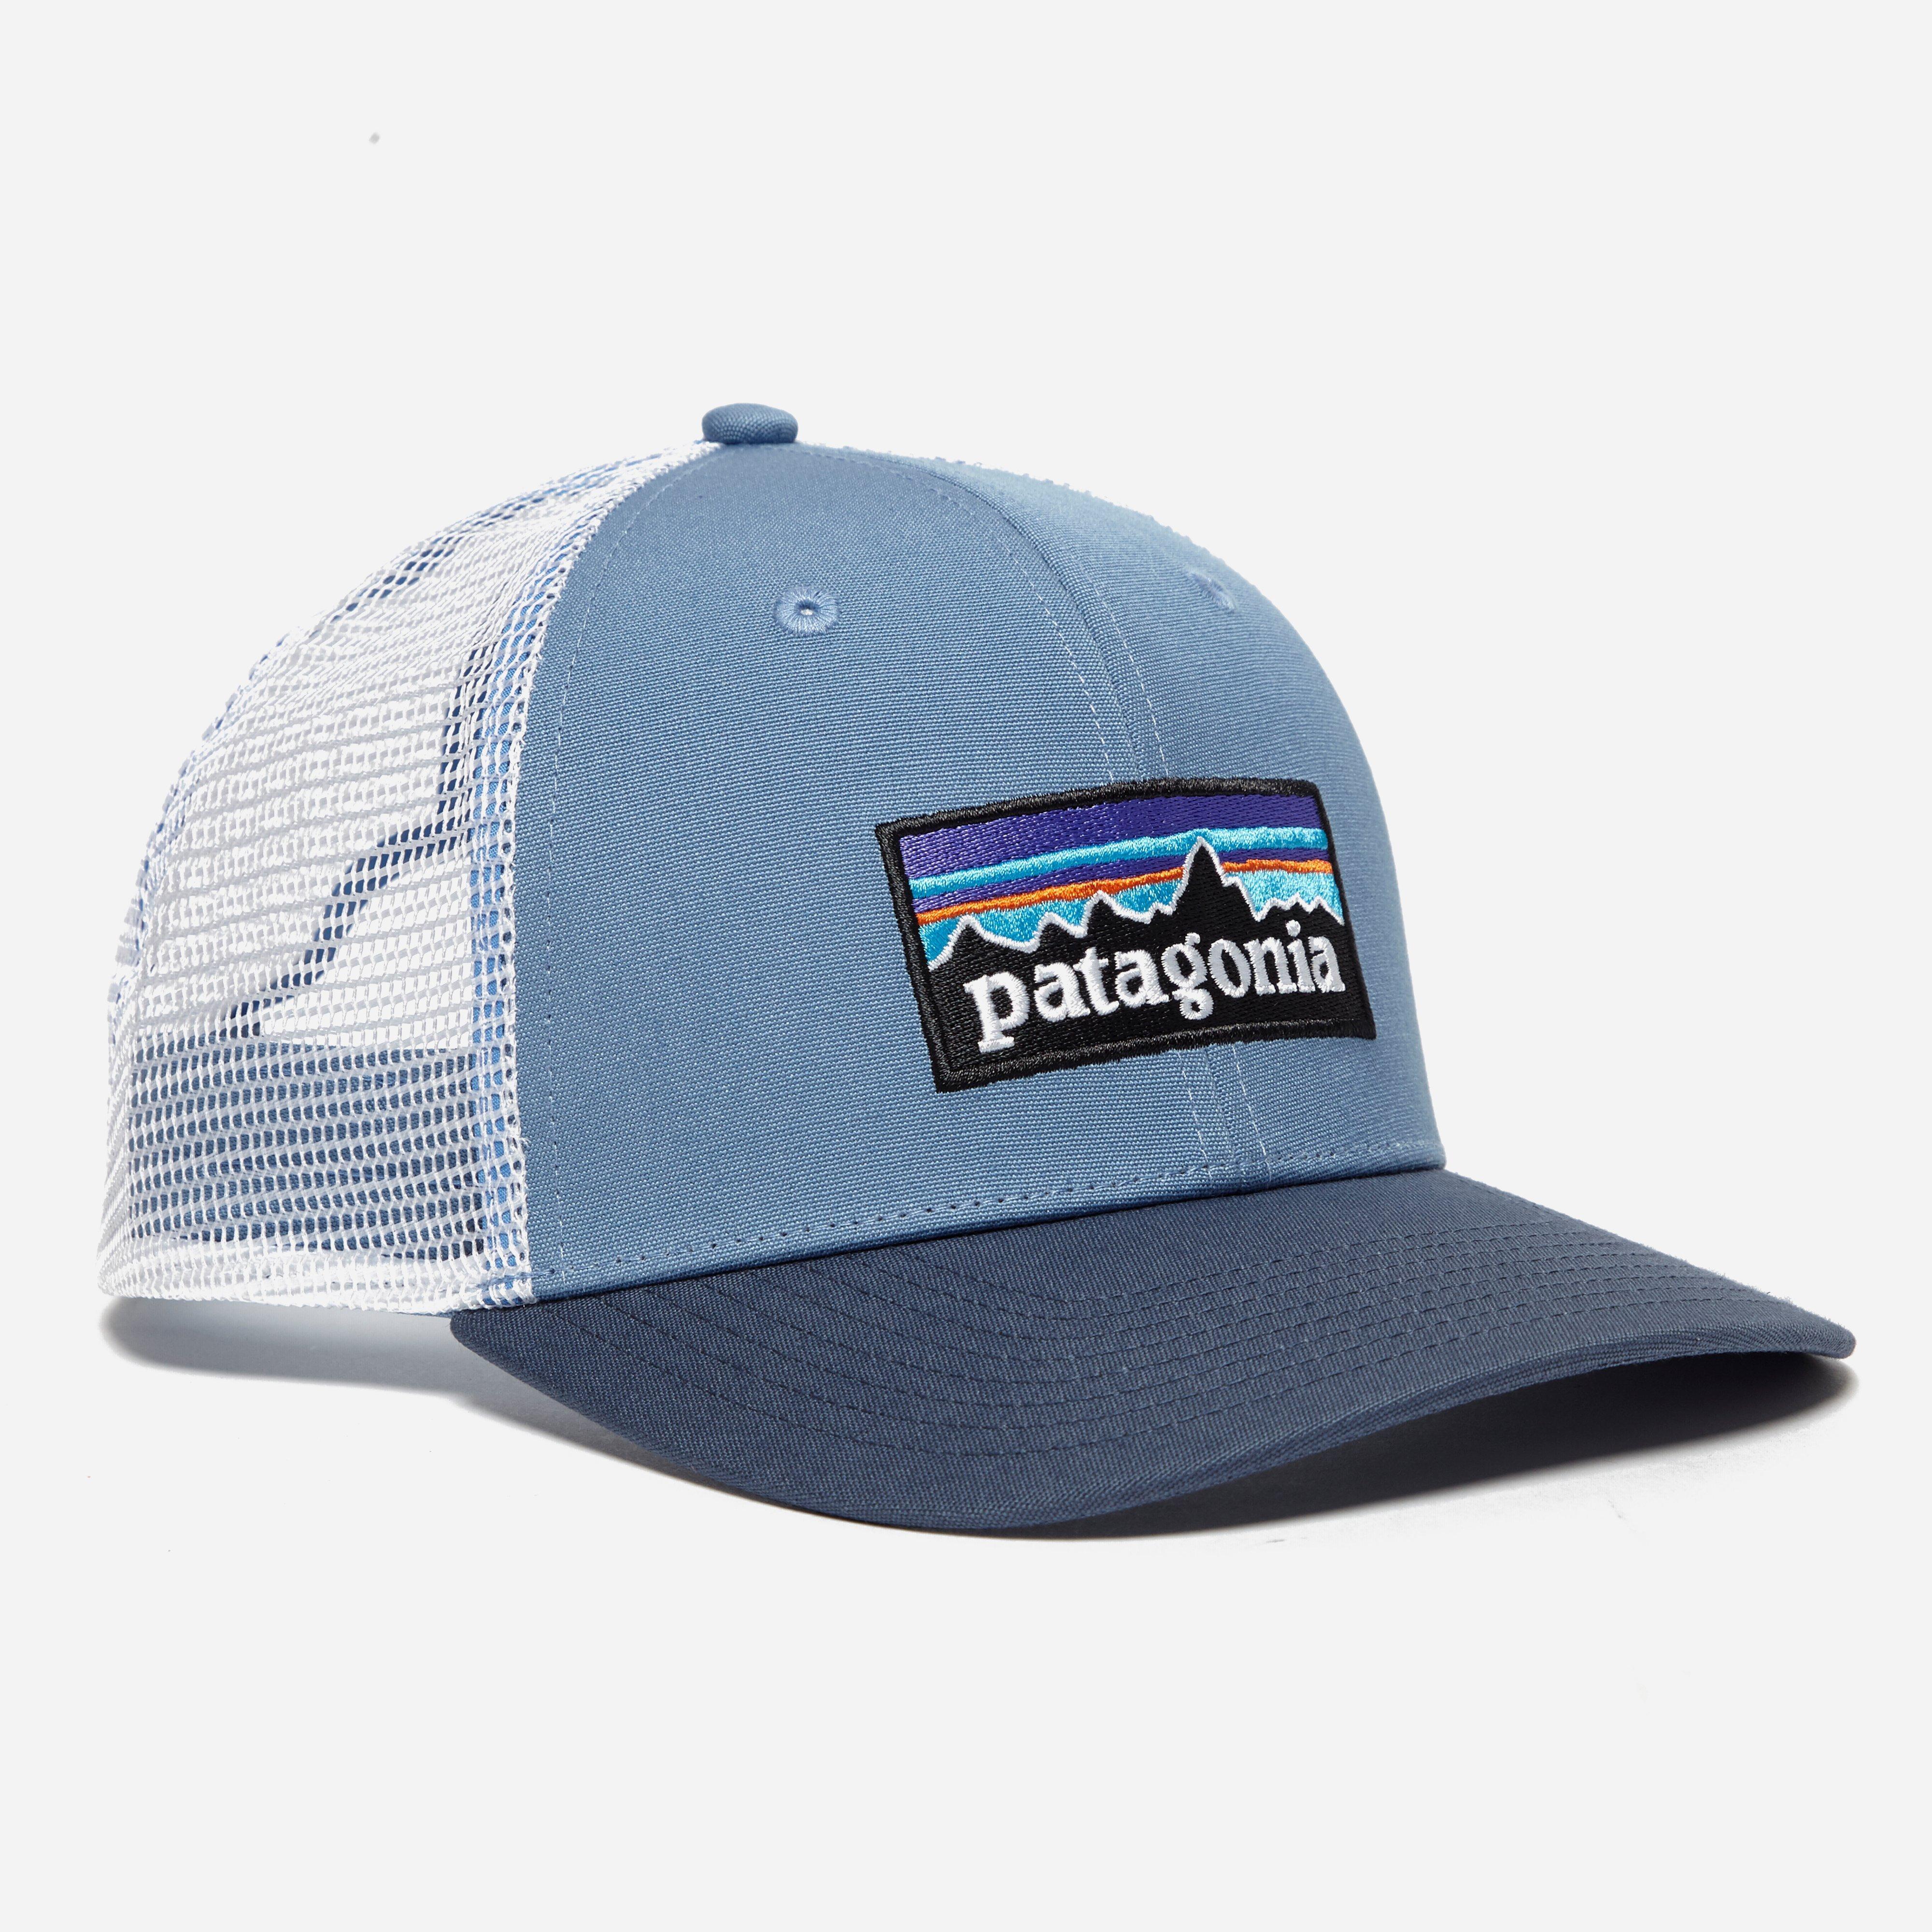 Who Has a Blue P Logo - Patagonia P 6 Logo Trucker Hat In Blue For Men